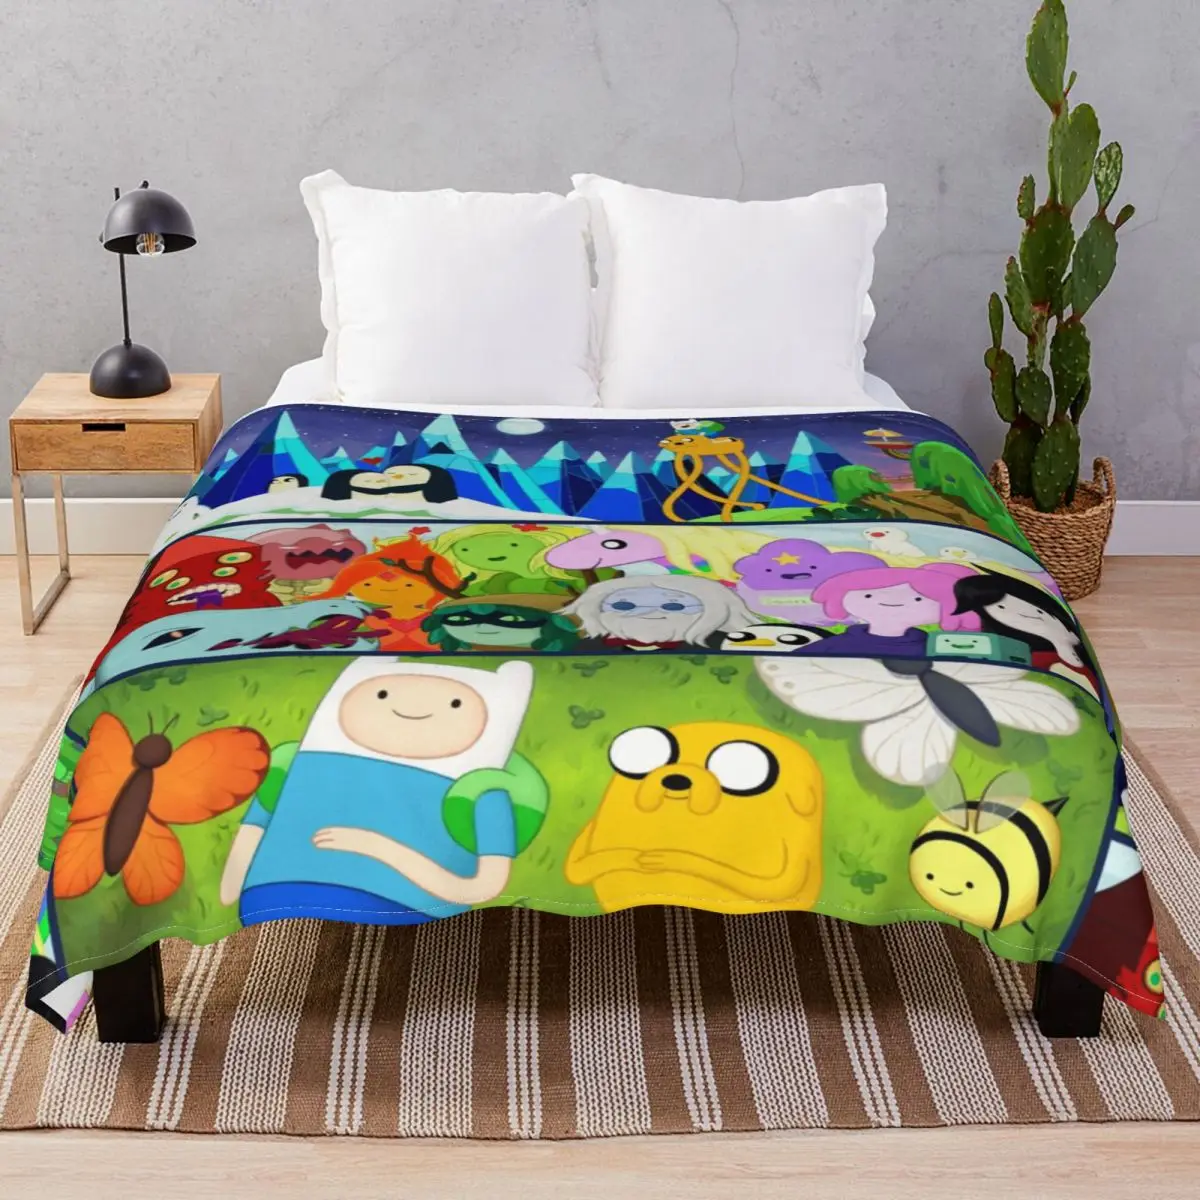 Time Adventure Blankets Fleece Printed Portable Unisex Throw Blanket for Bed Home Couch Travel Cinema